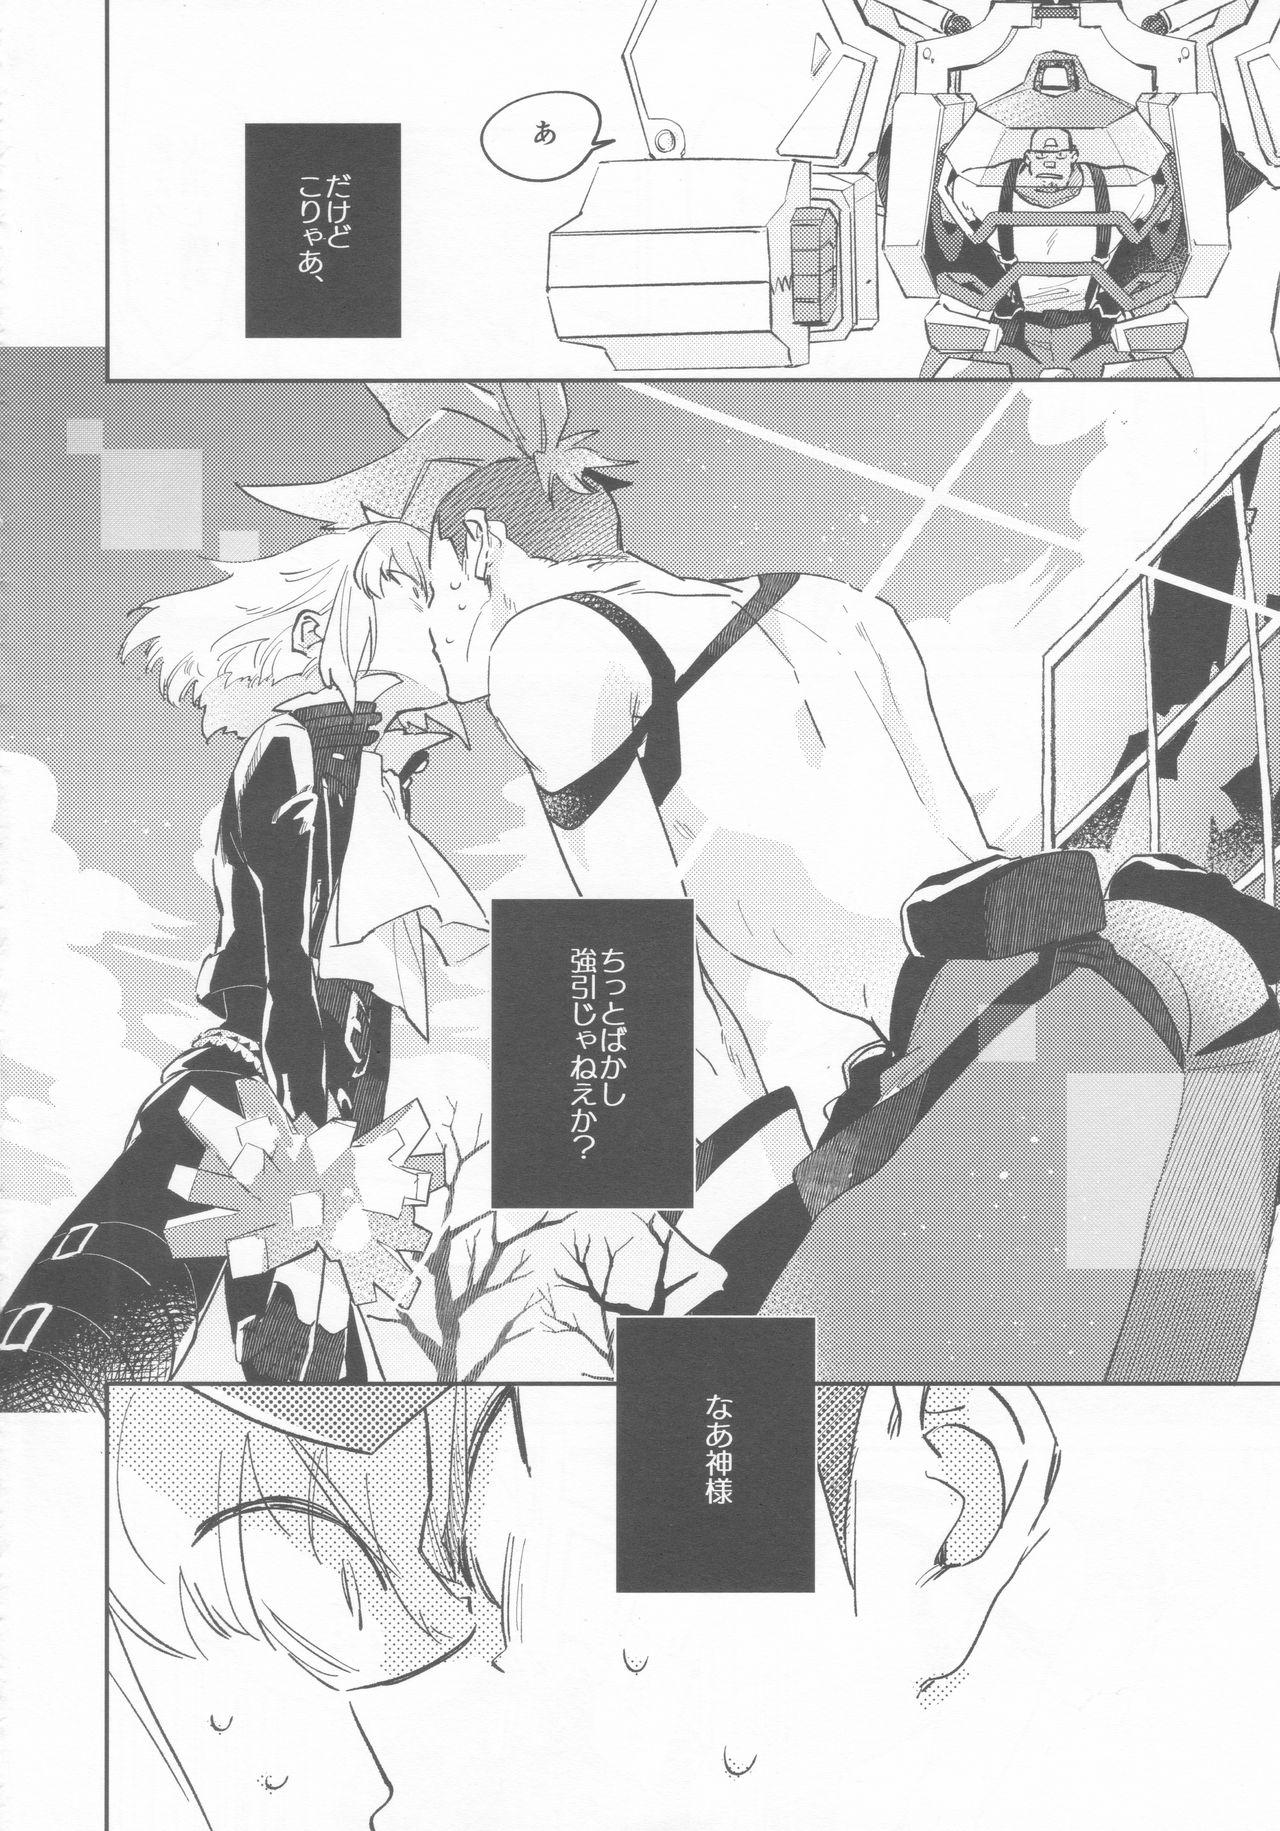 Longhair LOVE IS STRANGE. - Promare Joi - Page 3